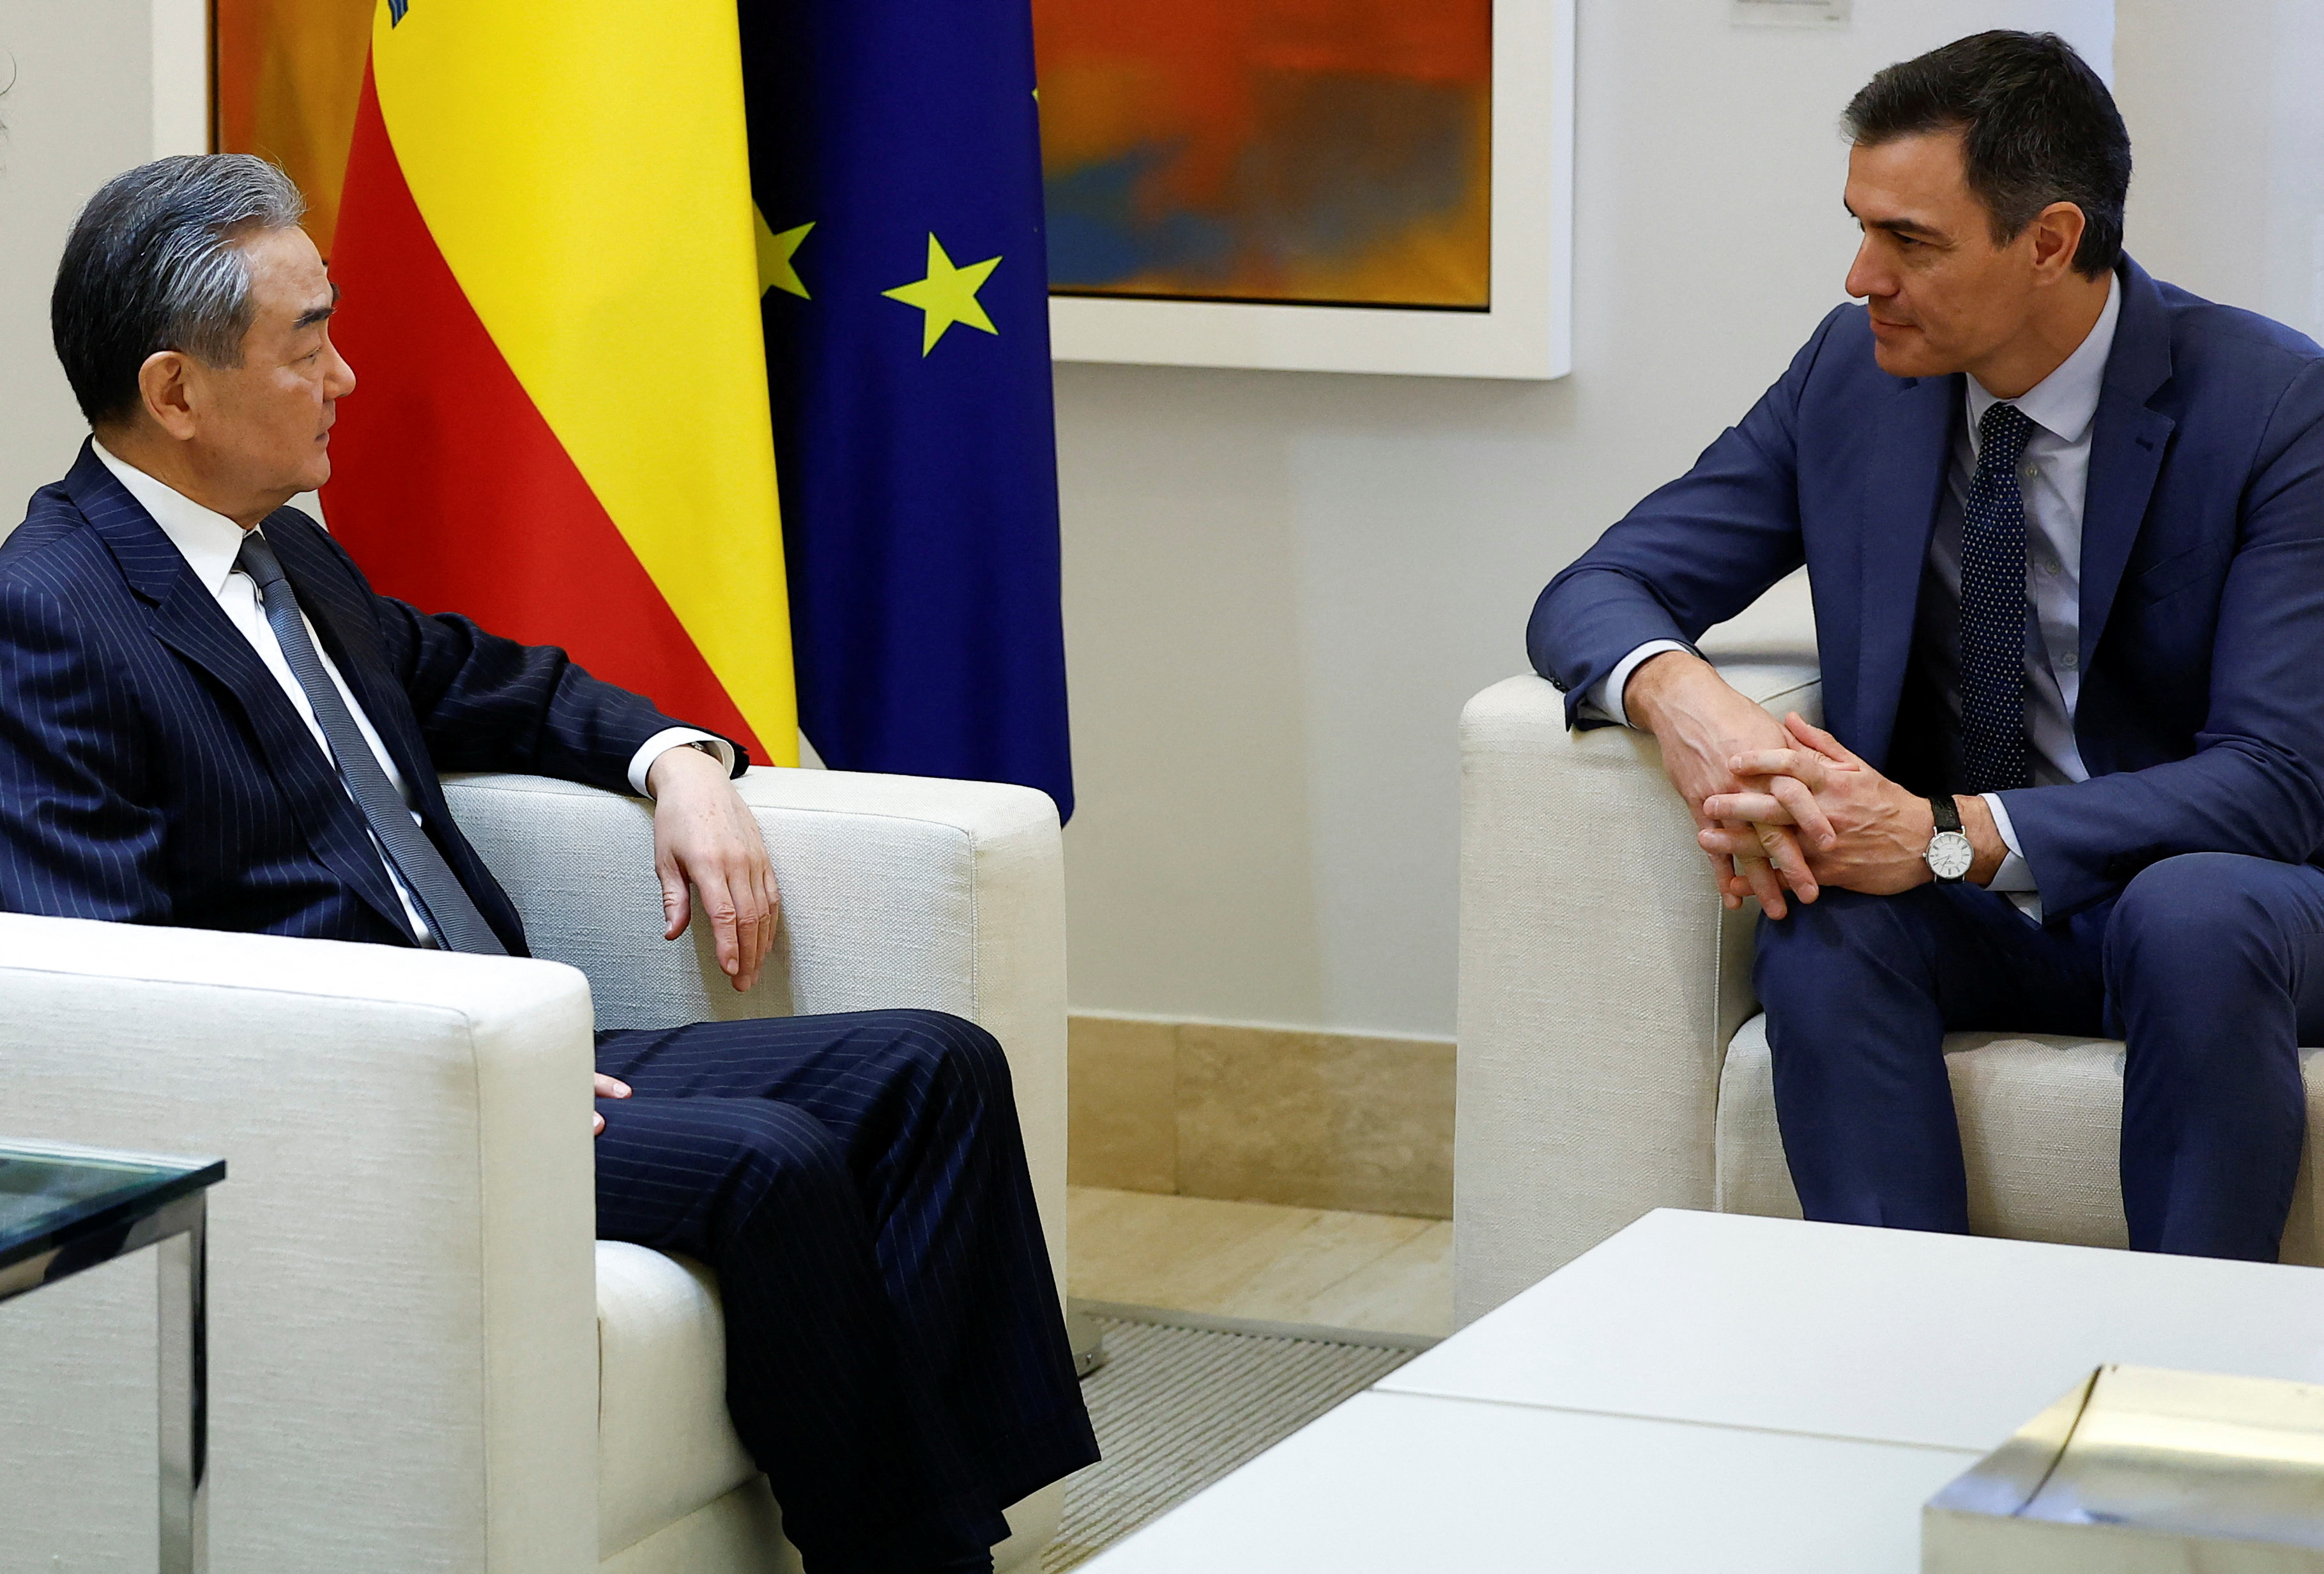 Spain and China Foreign Ministers meet Spanish Prime Minister Pedro Sanchez at Moncloa Palace